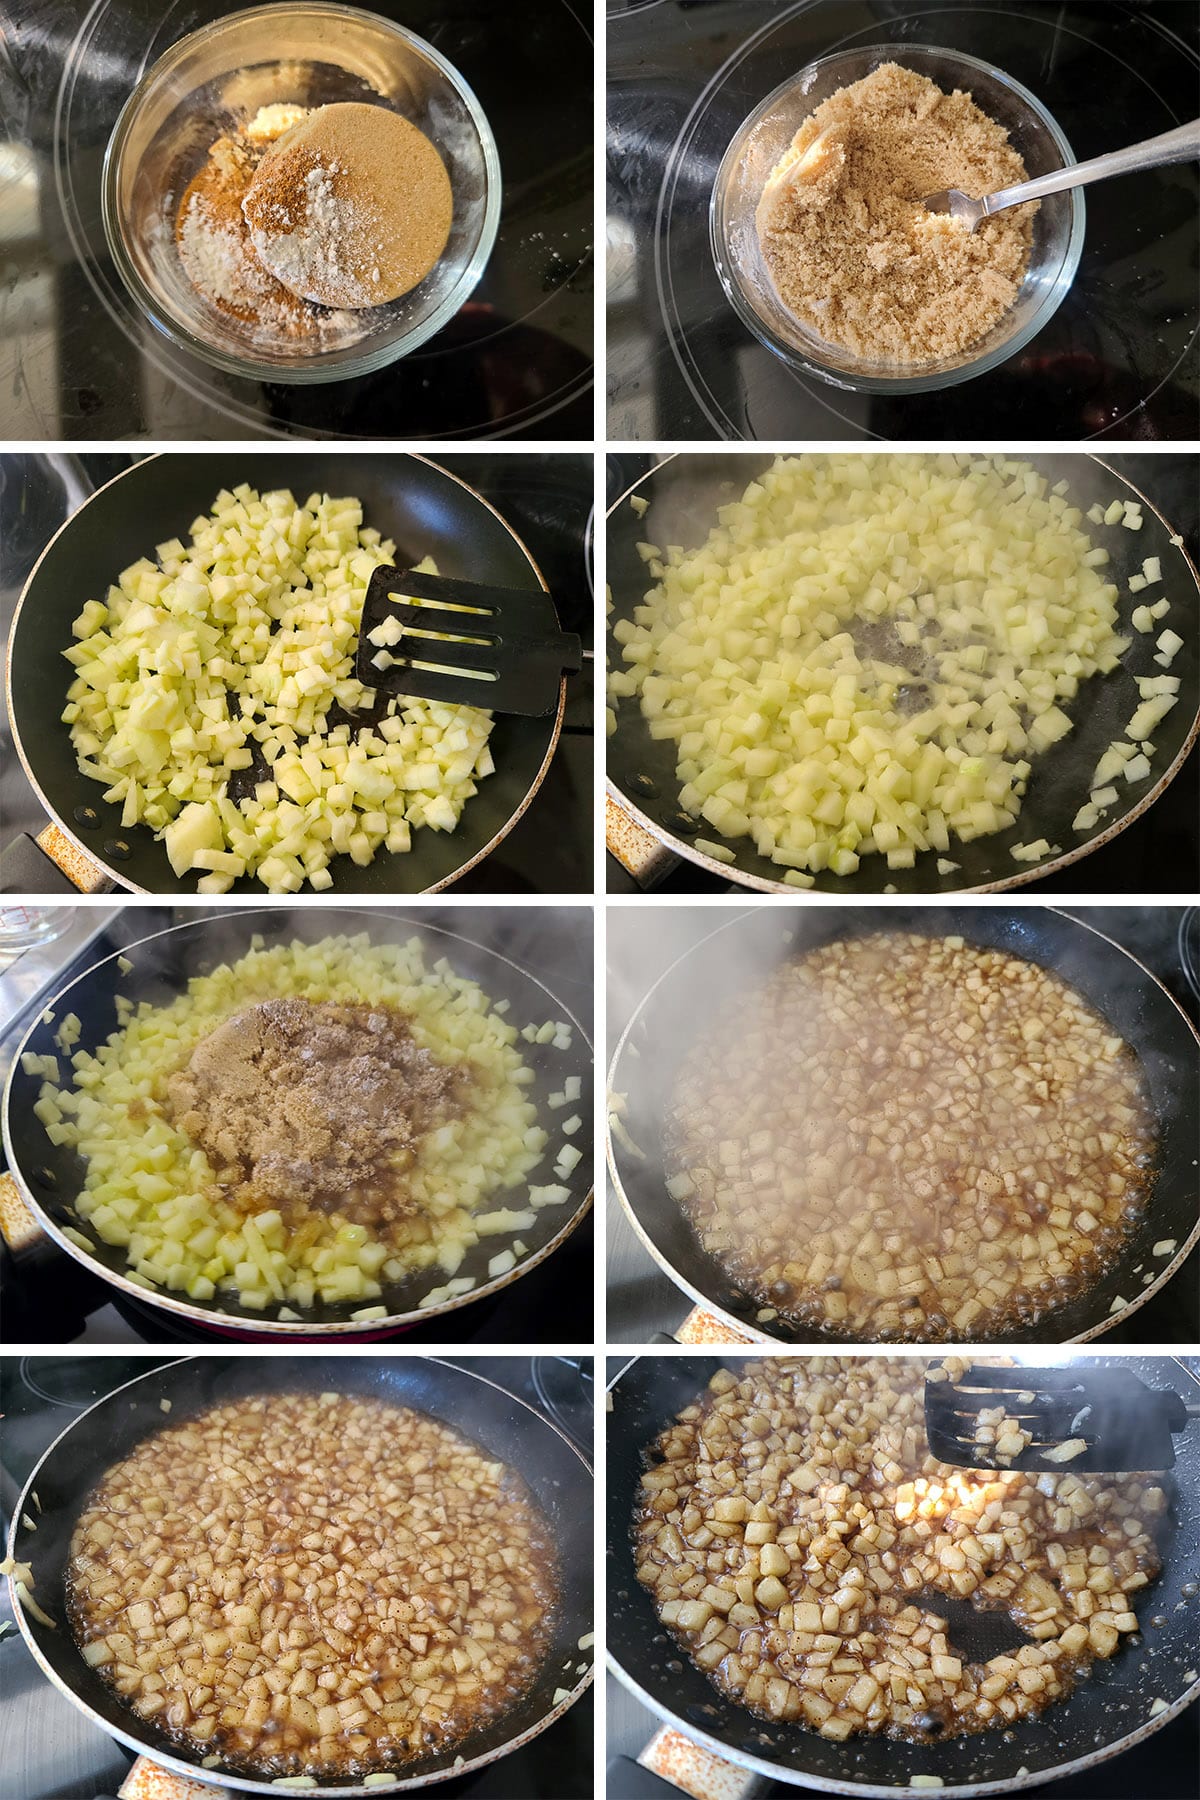 An 8 part image showing the apple pie filling being made.